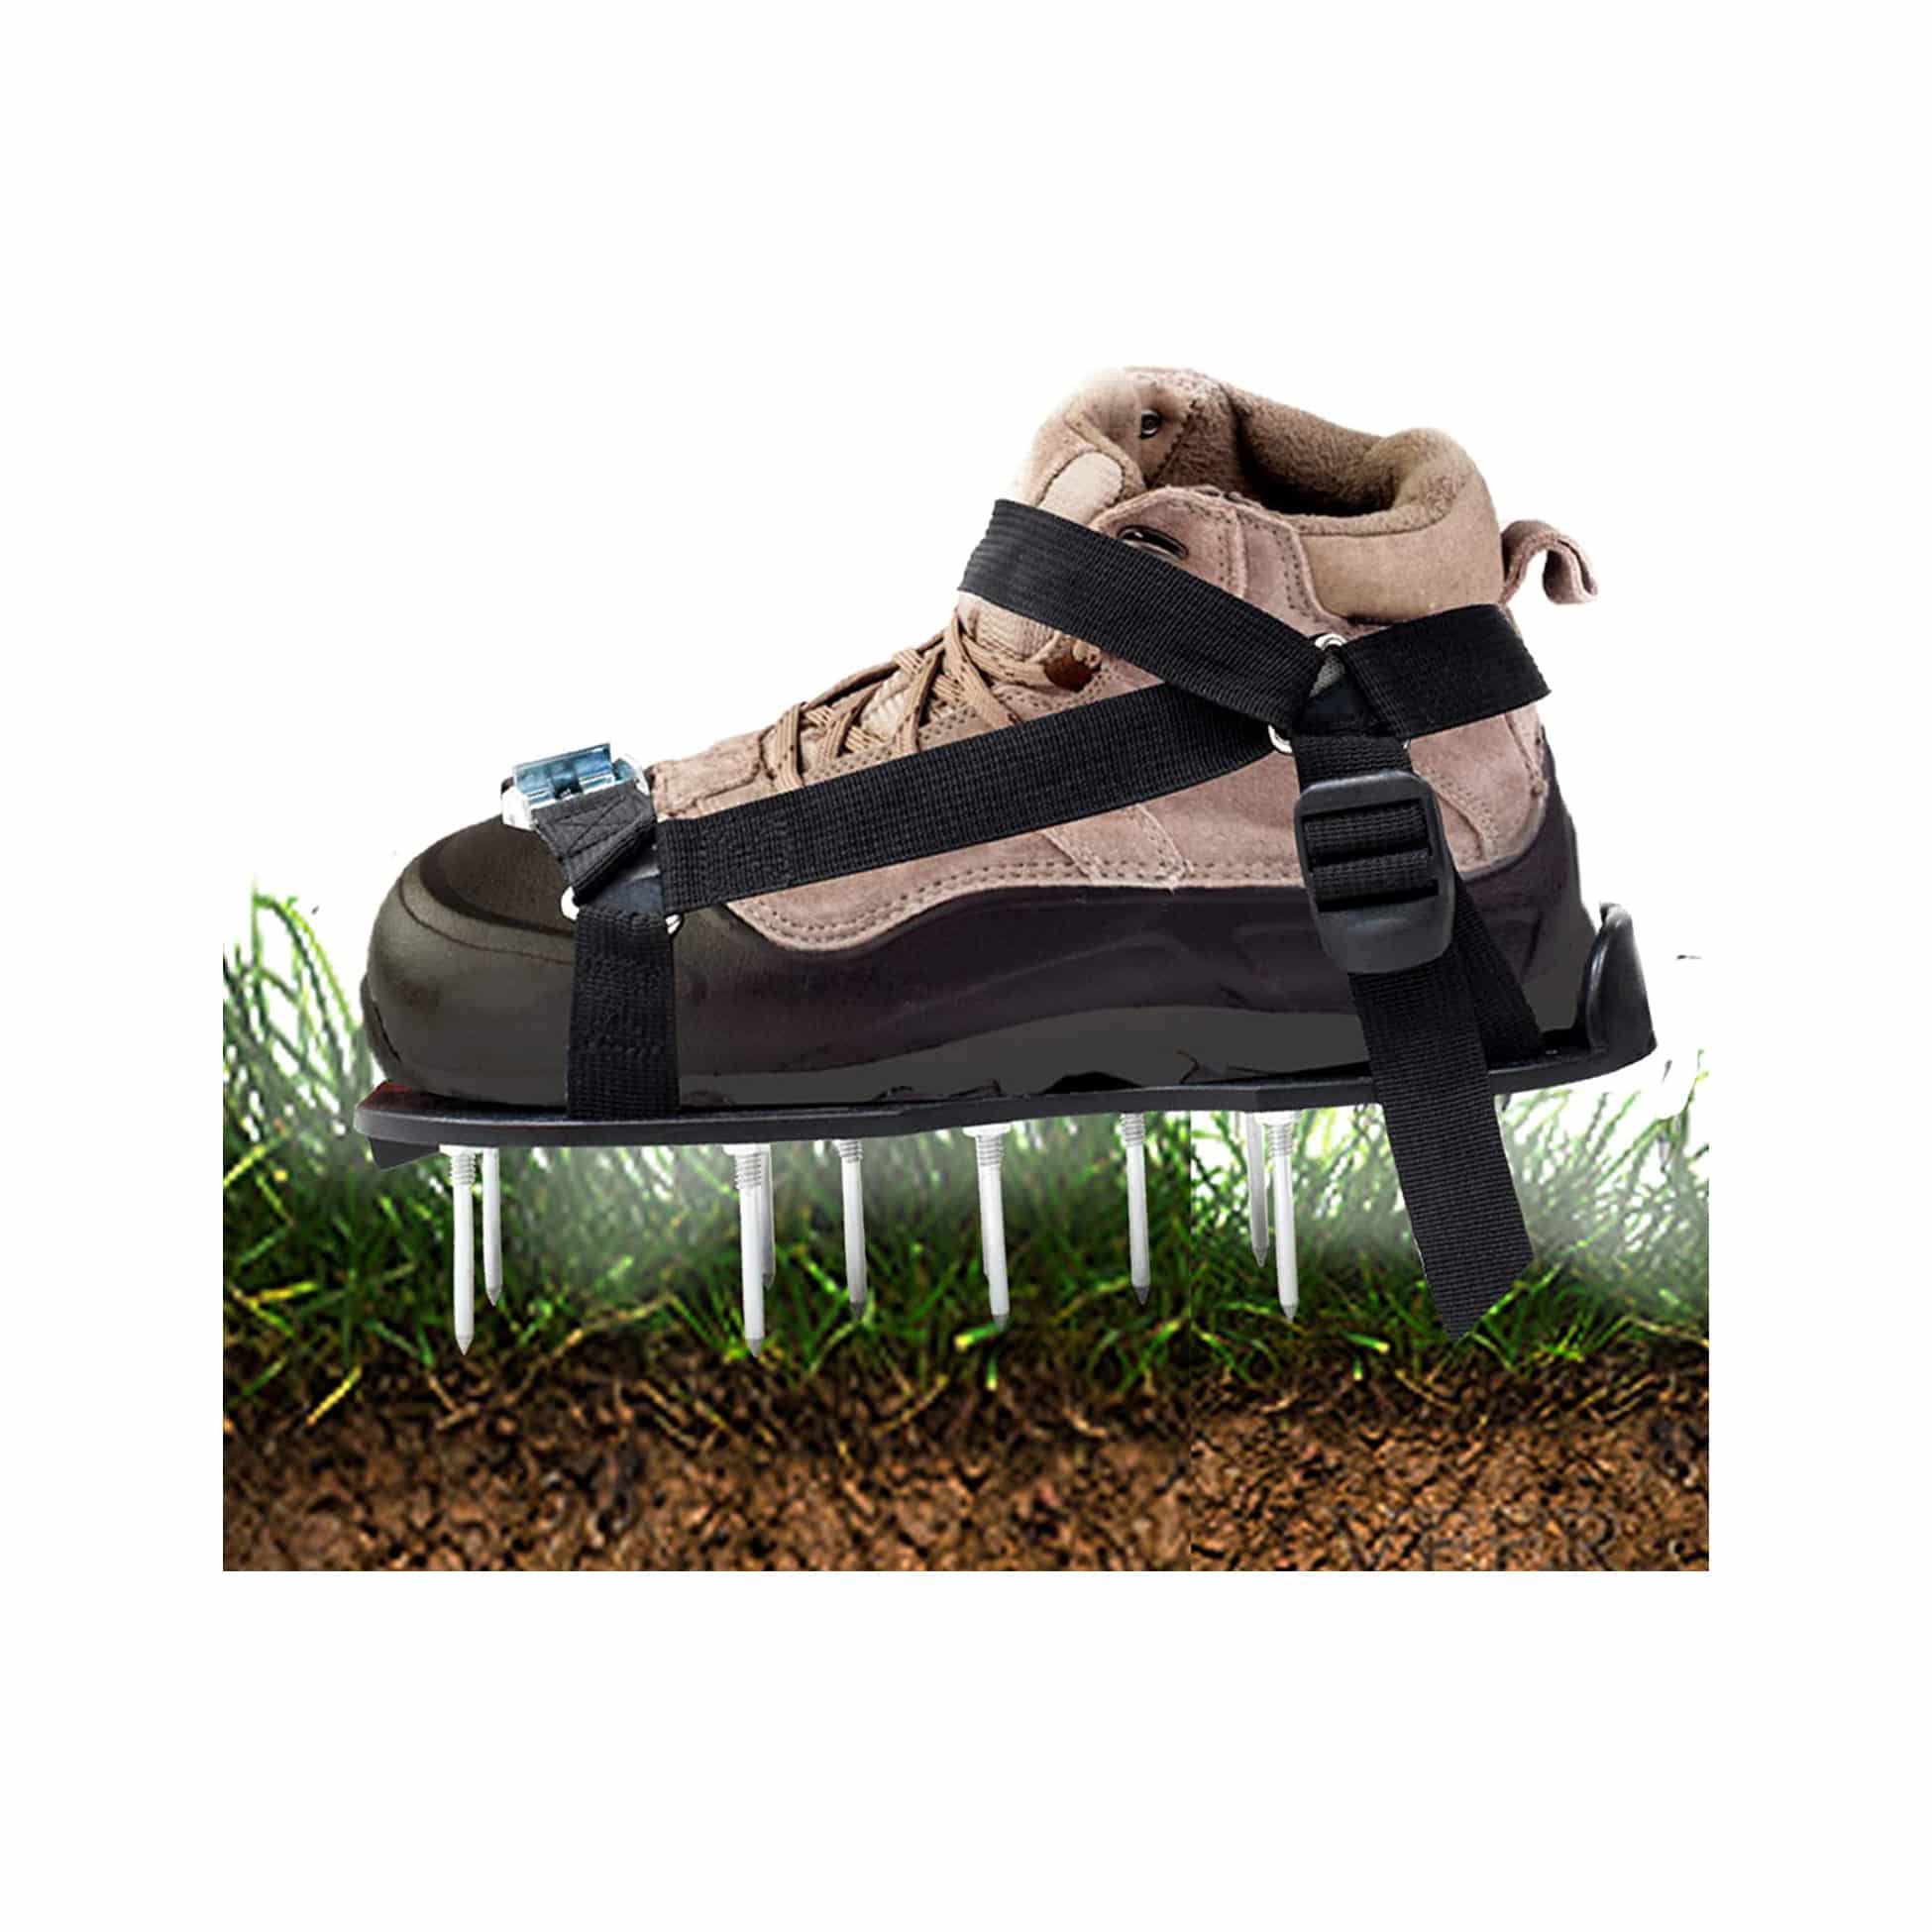 Top 10 Best Lawn Aerator Shoes in 2021 Reviews | Buyer's Guide